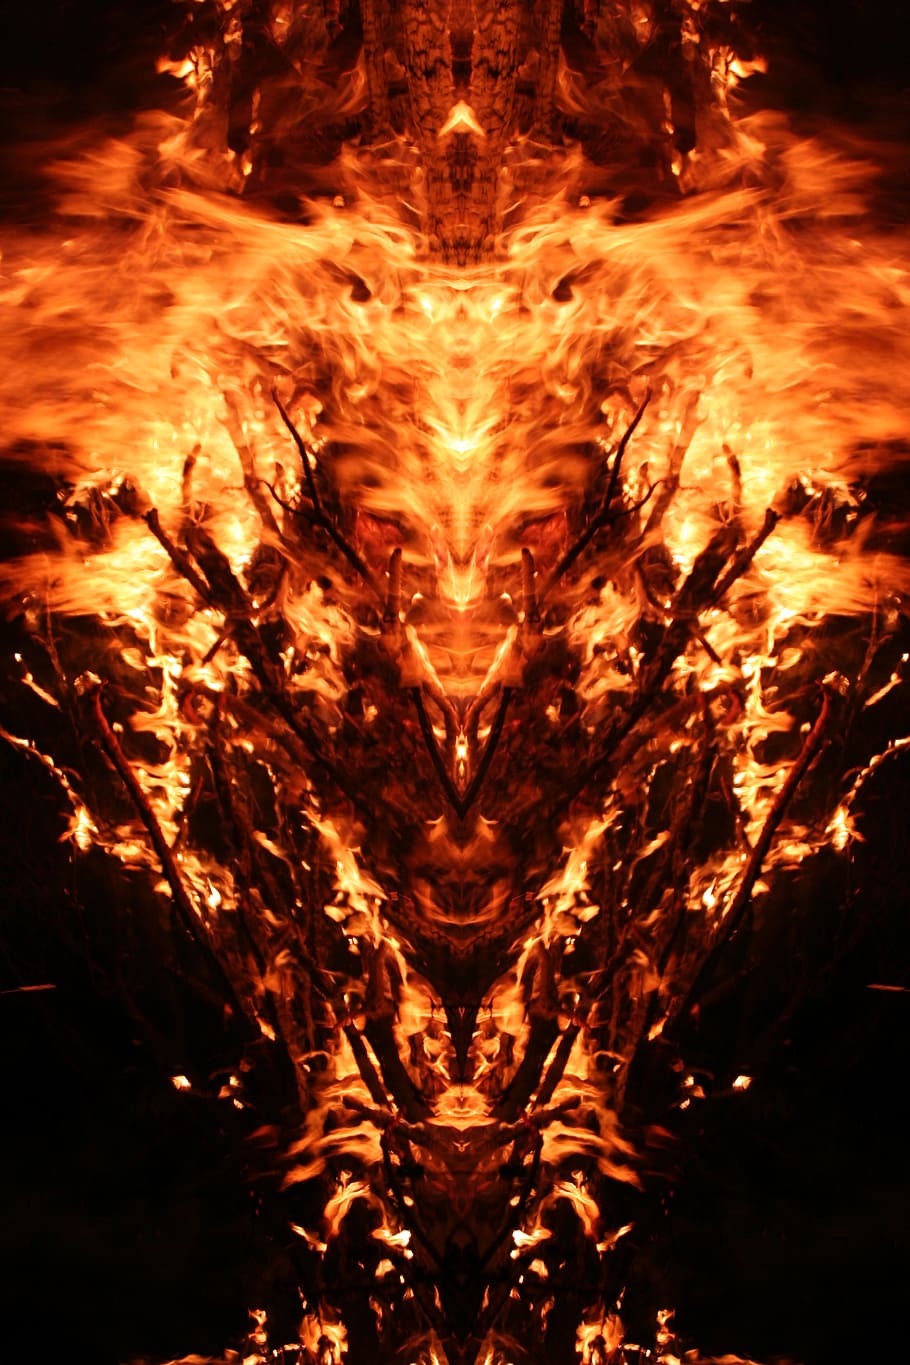 dragon flame poster, mirroring, fire, mystical, creature, heat